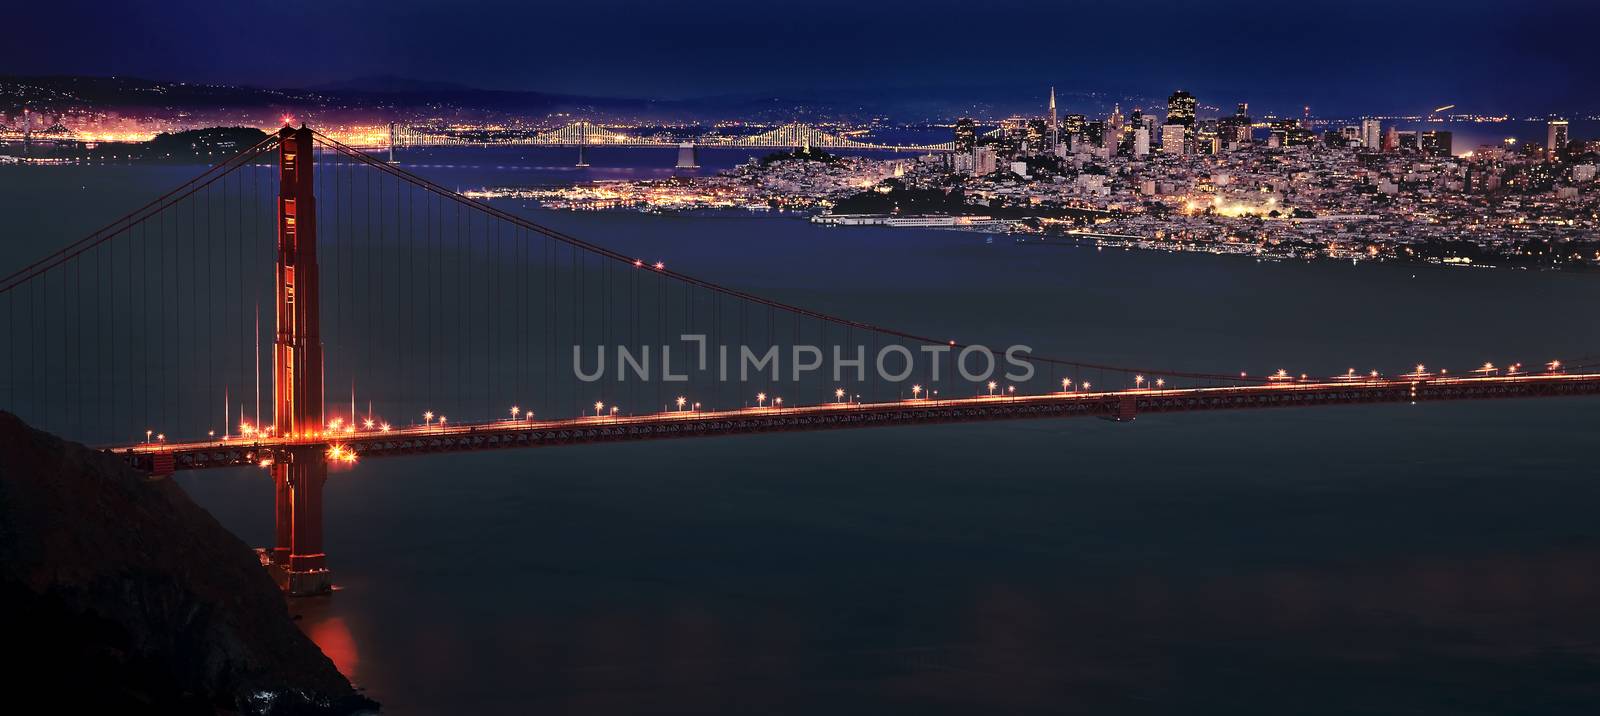 San Fransisco Skyline night shot from high viewpoint